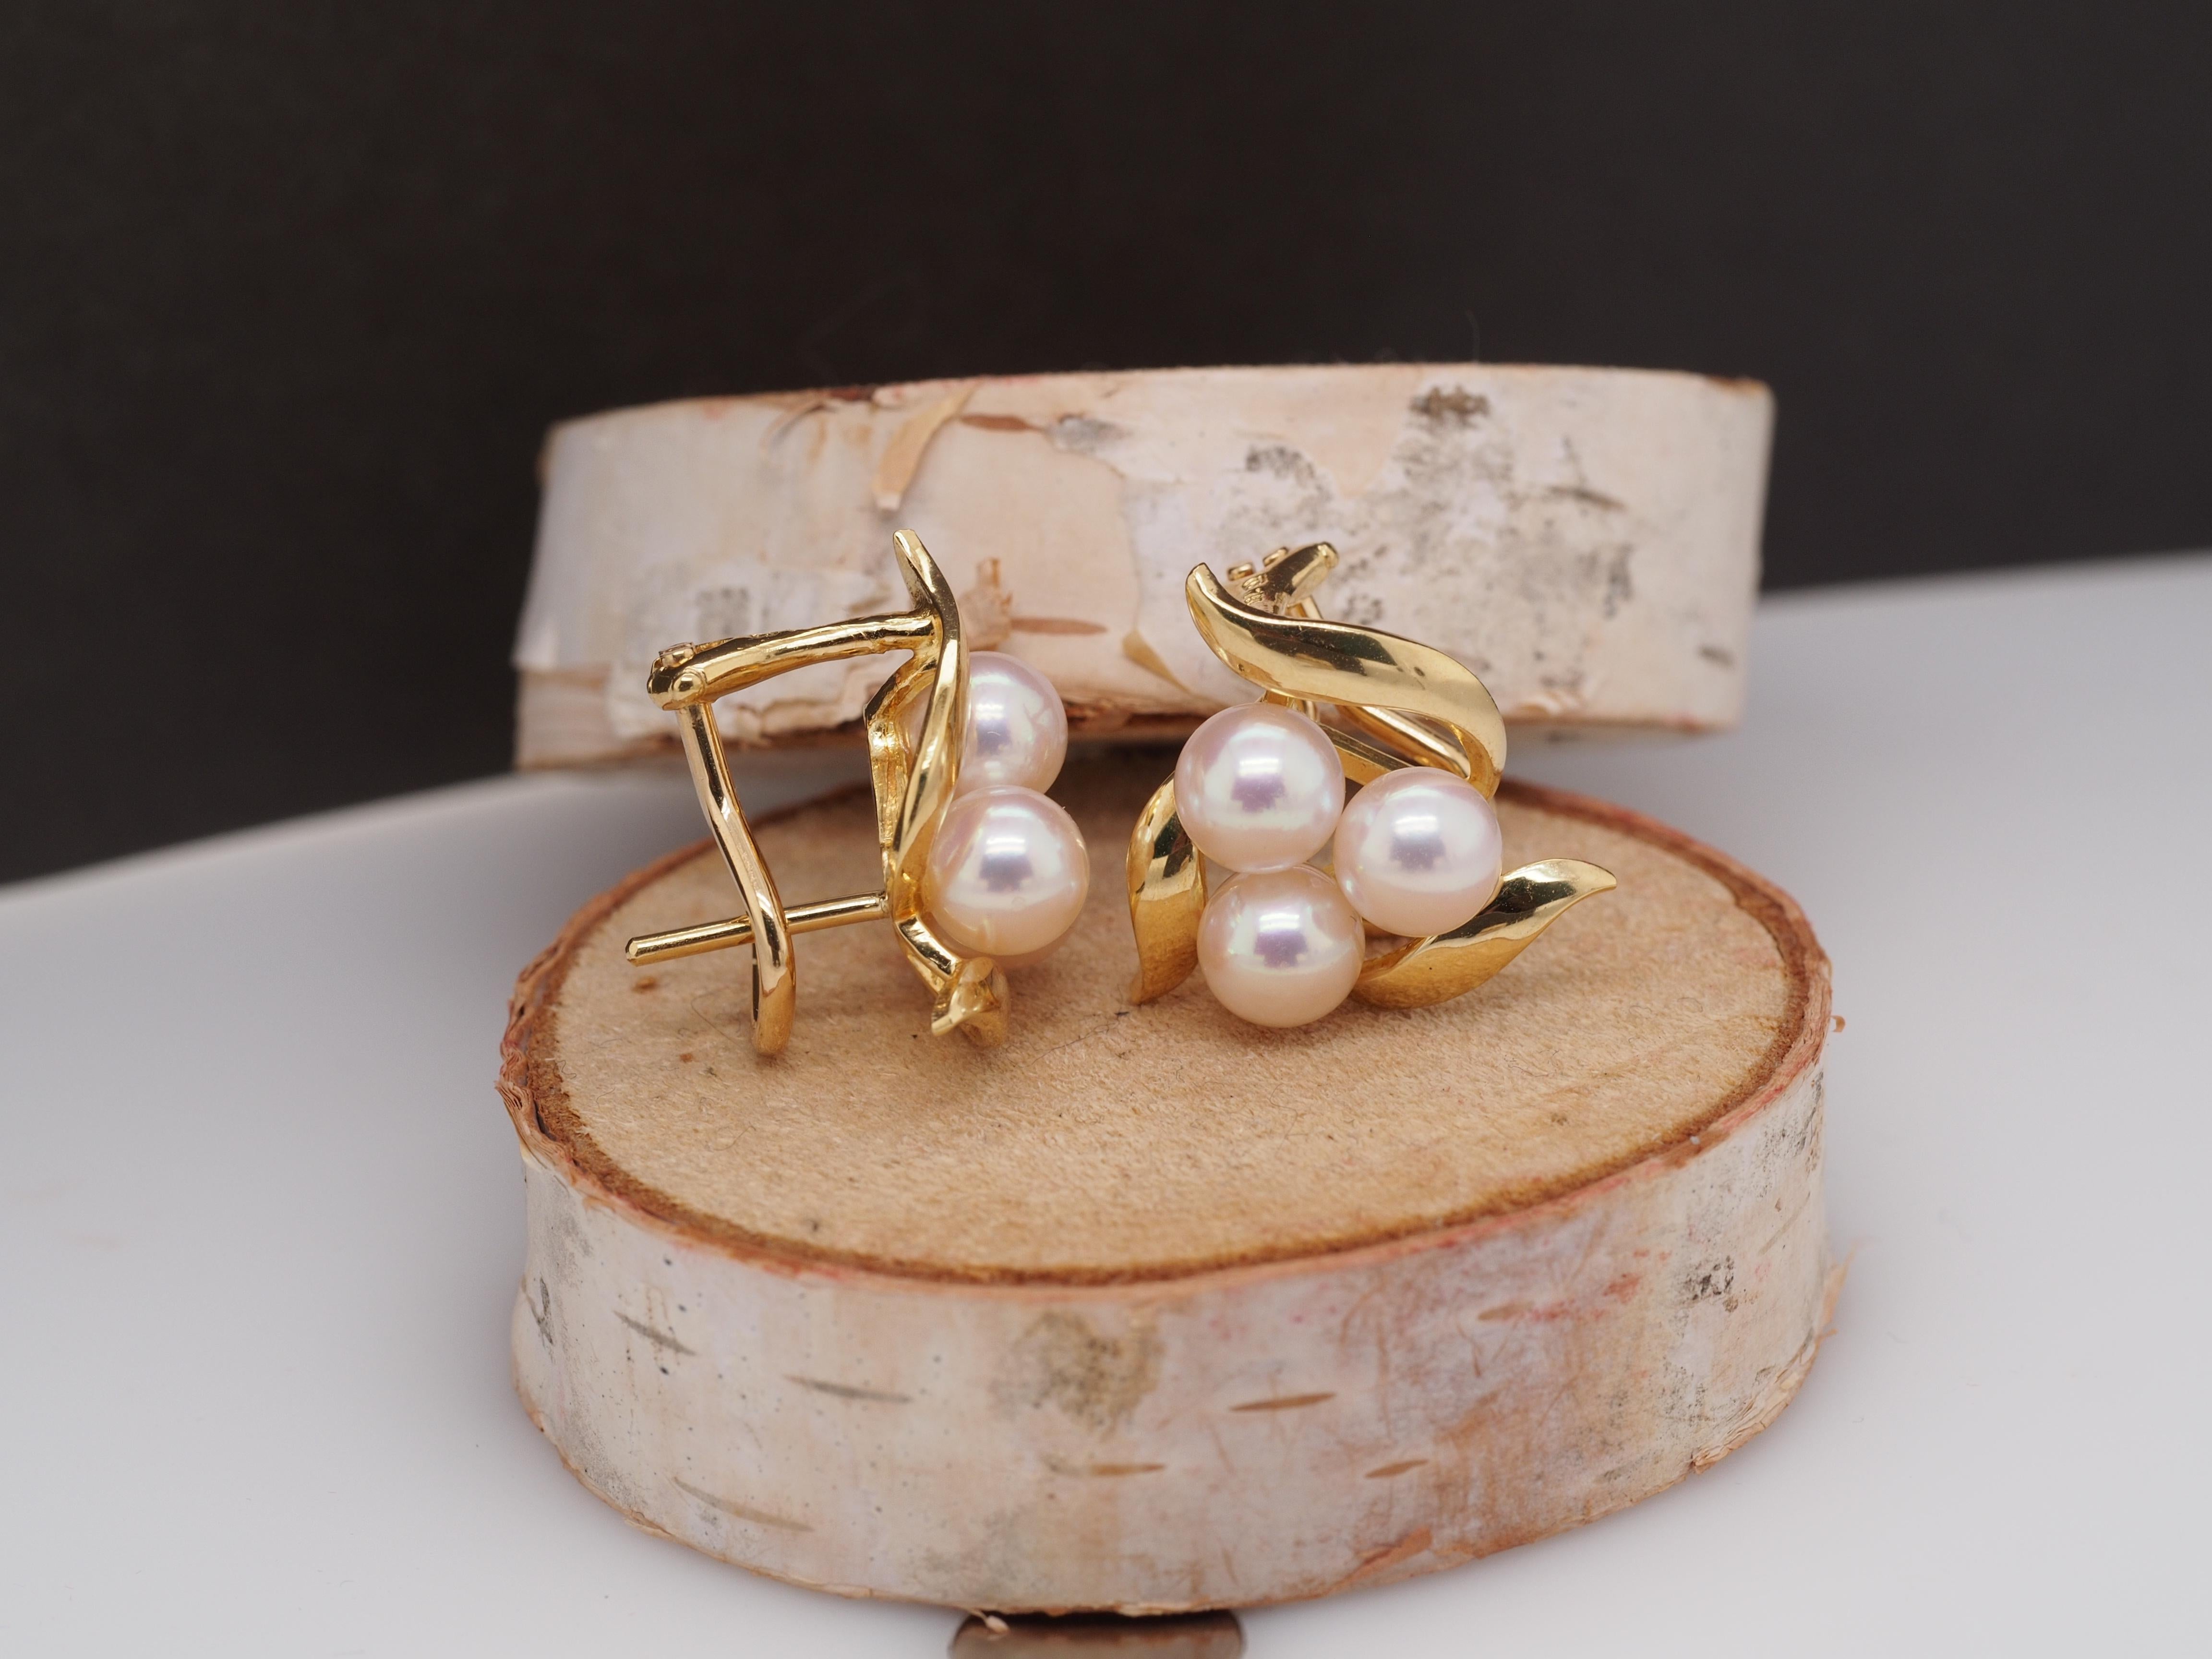 Year: 1990s

Item Details: Mikimoto
Metal Type: 18K Yellow Gold [Hallmarked, and Tested]
Weight: 7.1 grams

Pearl Details:

5mm, 6 stones total, pinkish luster, AAA Quality

Measurements:
Condition: Excellent

Price: $1500